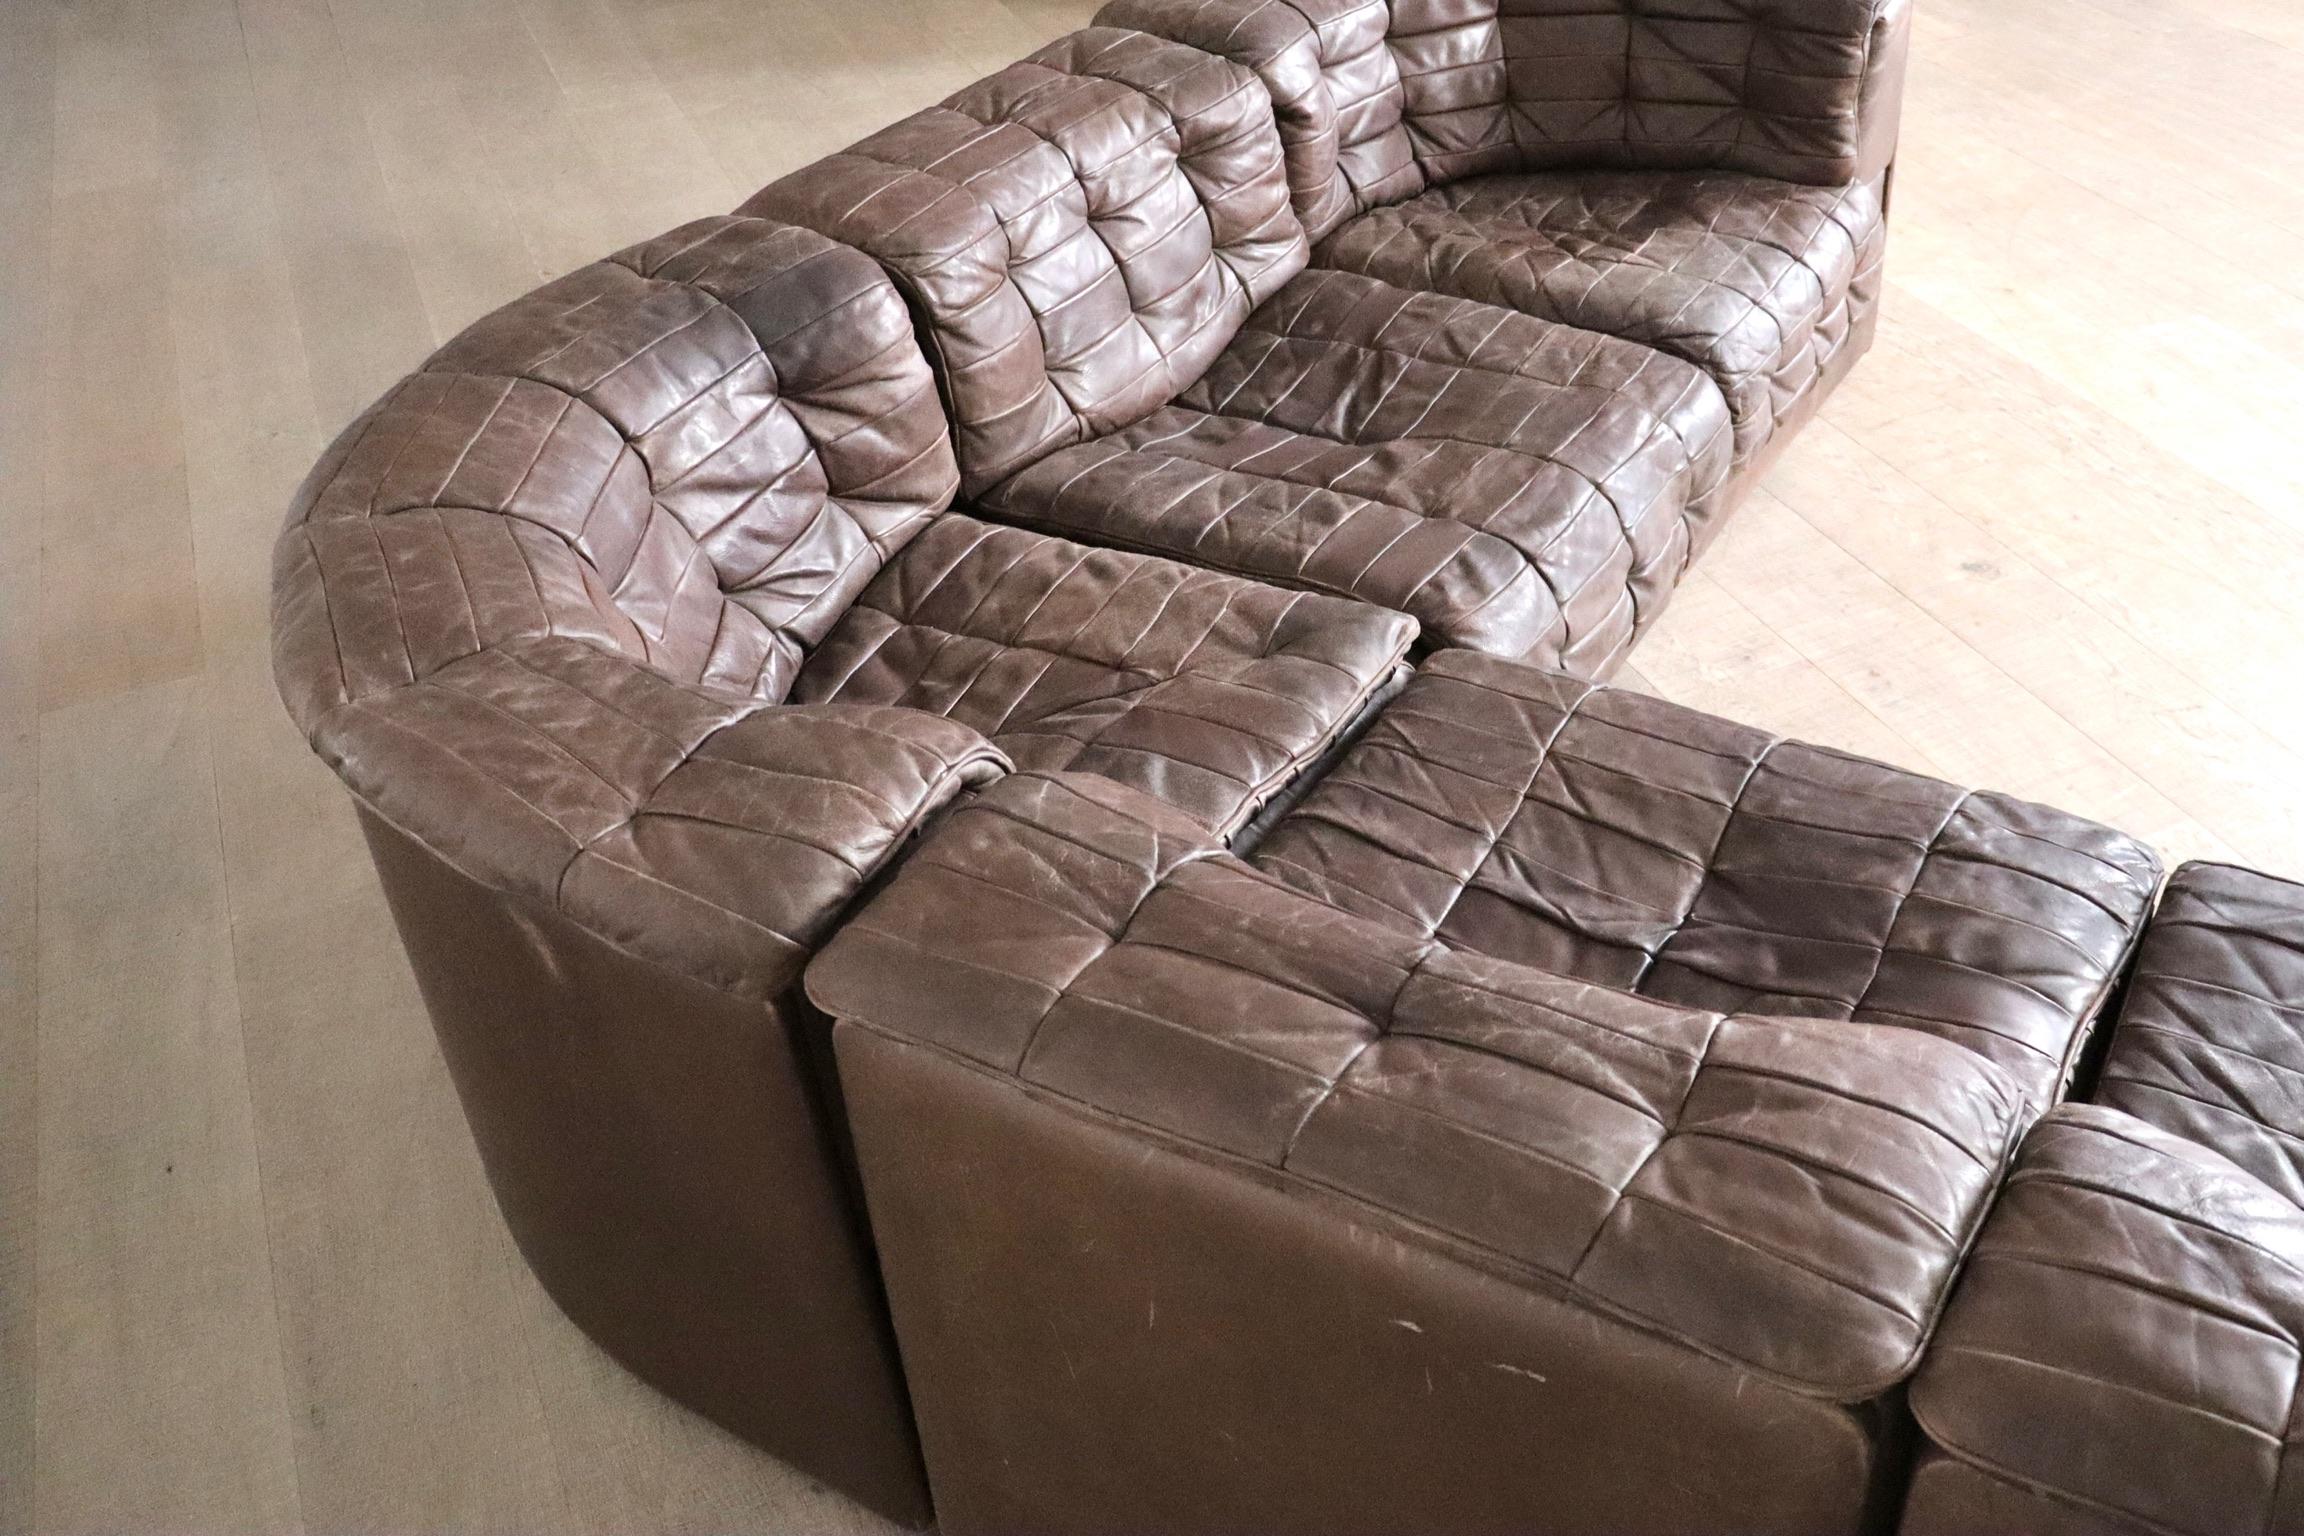 De Sede DS-11 Modular Sofa In Brown Patchwork Leather, Switzerland 1970s For Sale 3